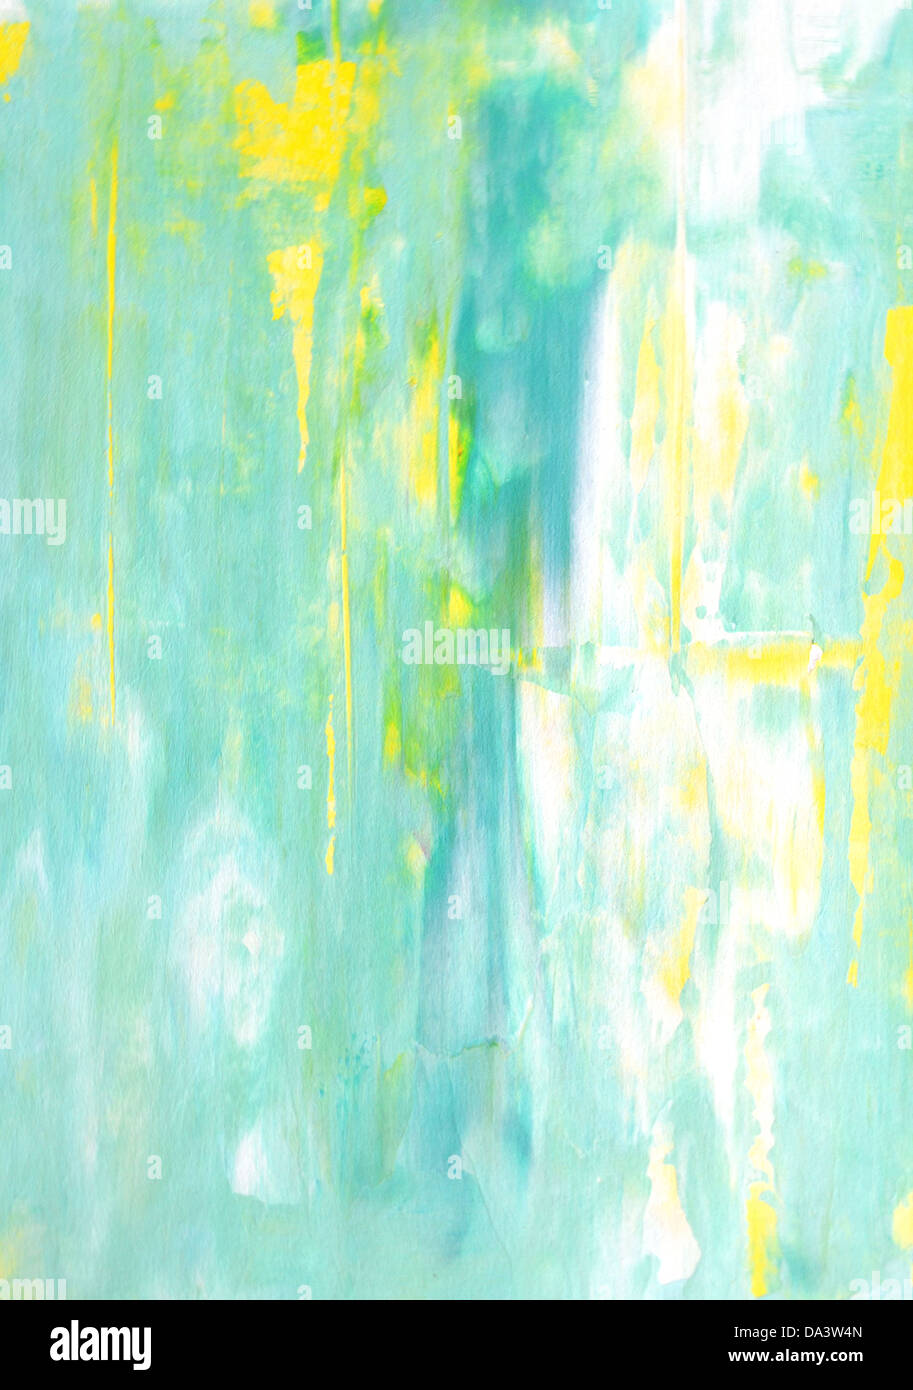 Turquoise and Yellow Abstract Art Painting Stock Photo